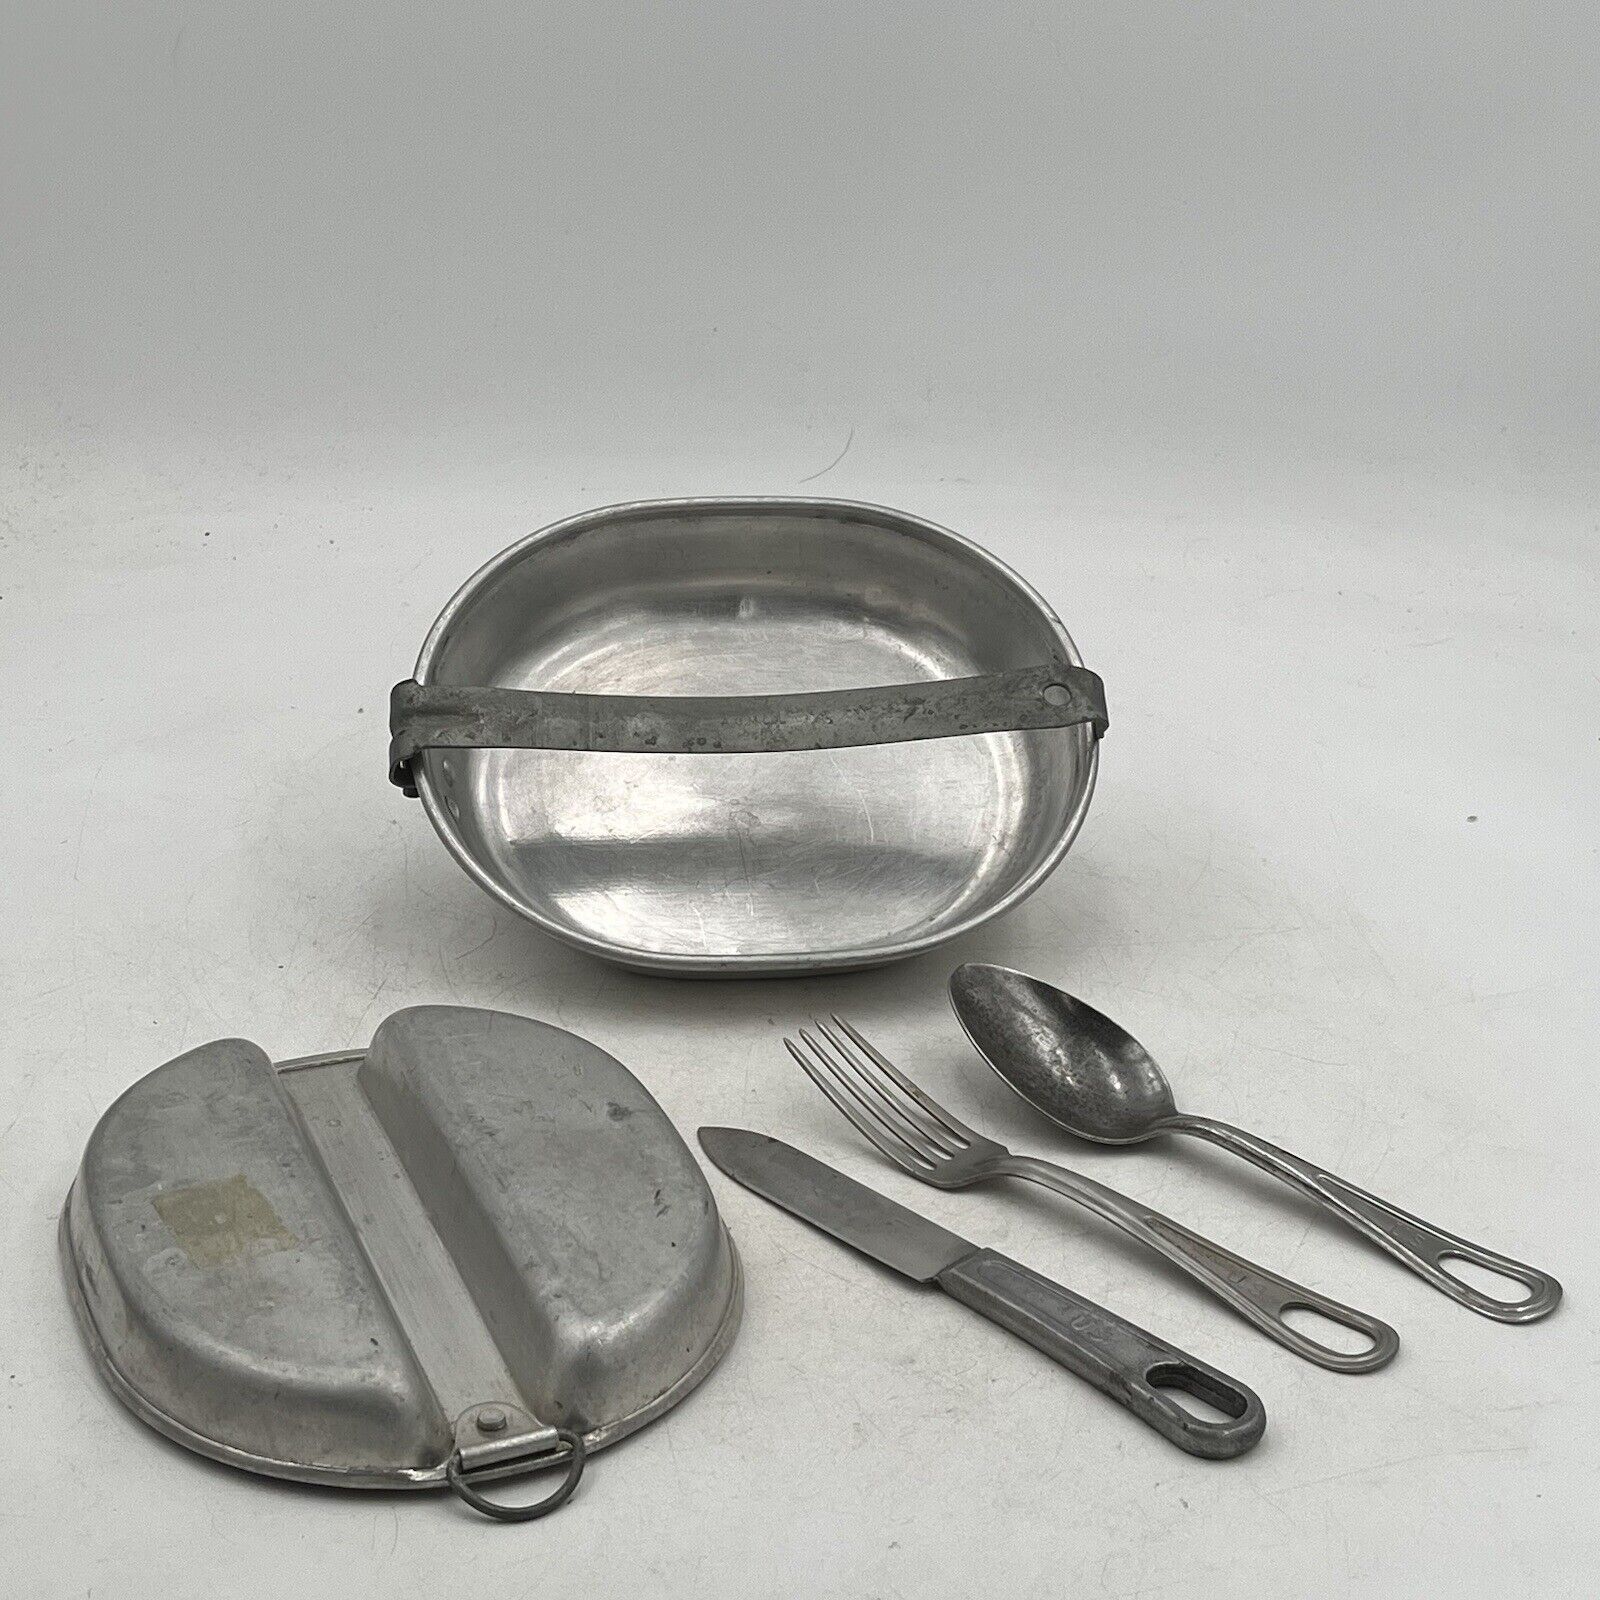 Original WW2 US Military Mess Kit 1945 Complete Utensils-Fork knife spoon WWII